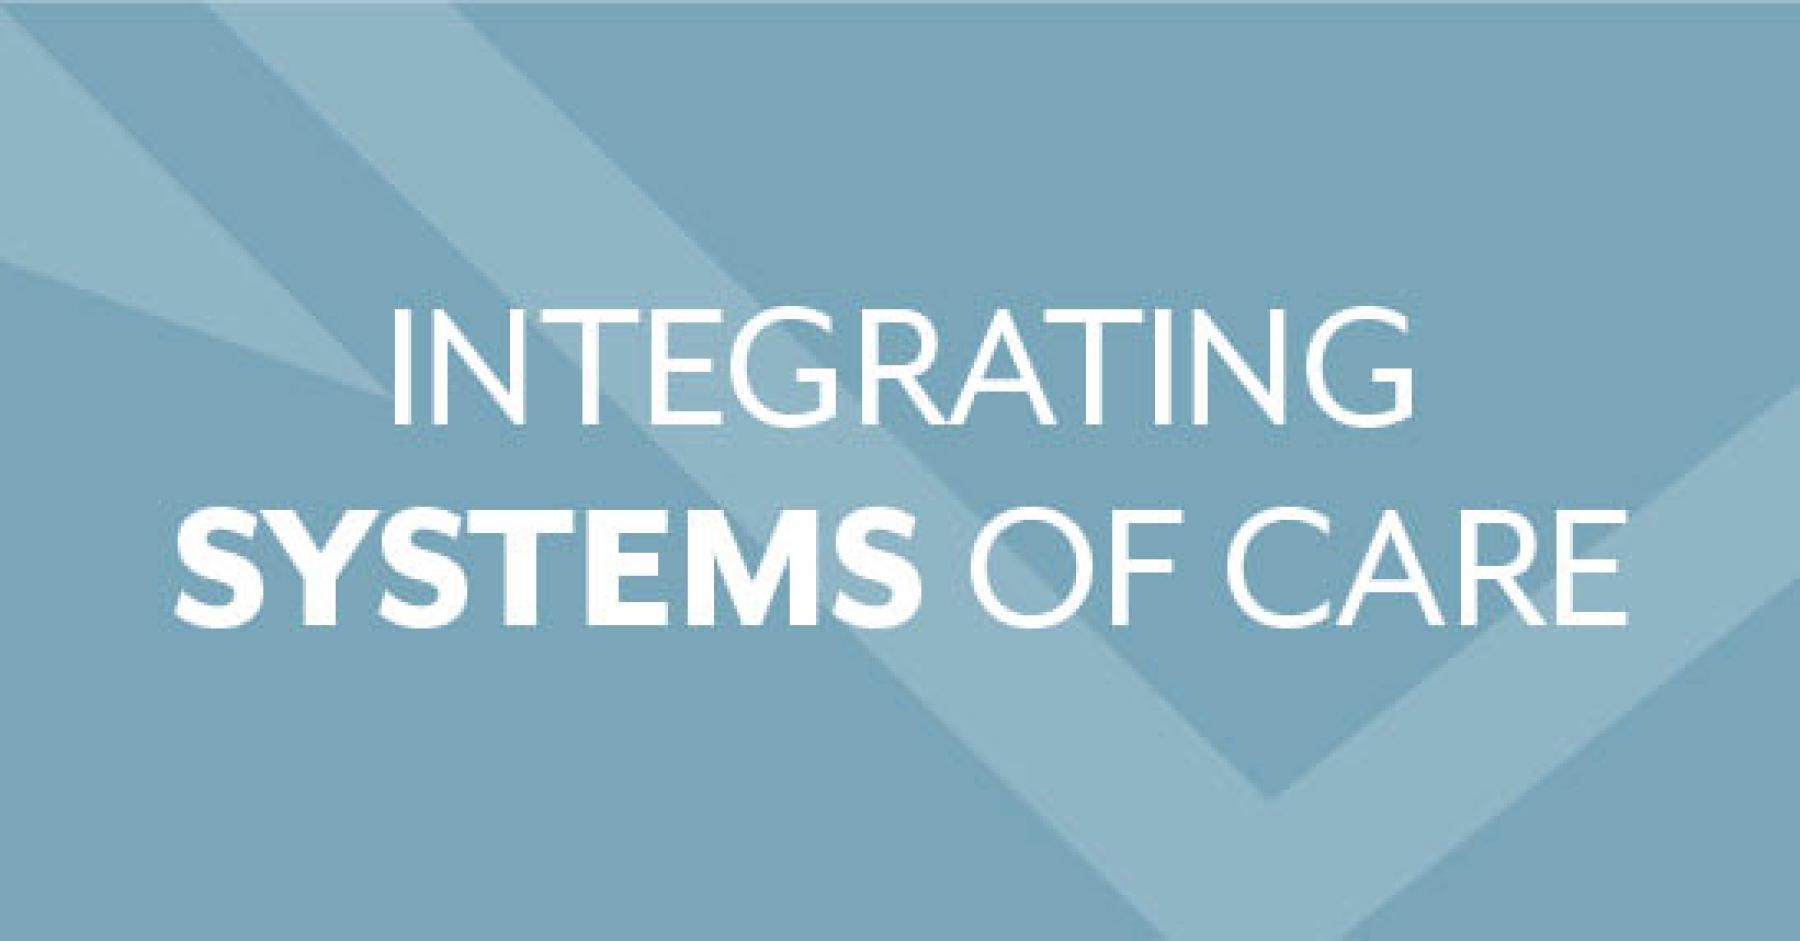 Integrating Systems of Care